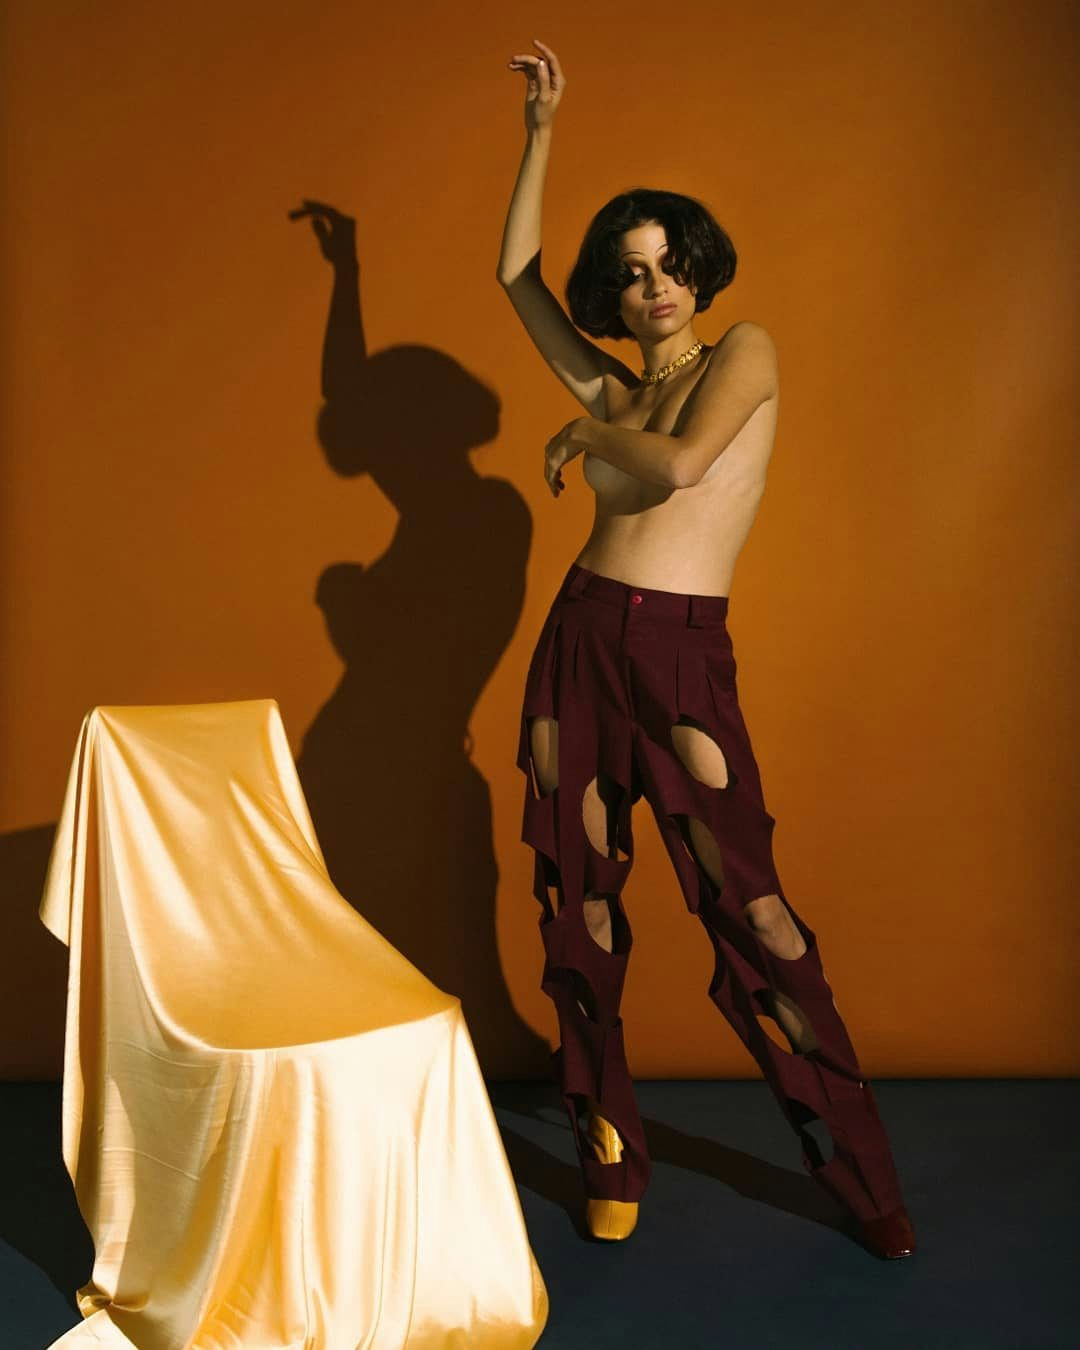 A young woman with stylish trousers and gold heels striking a pose against an orange backdrop with her shadow cast artistically.